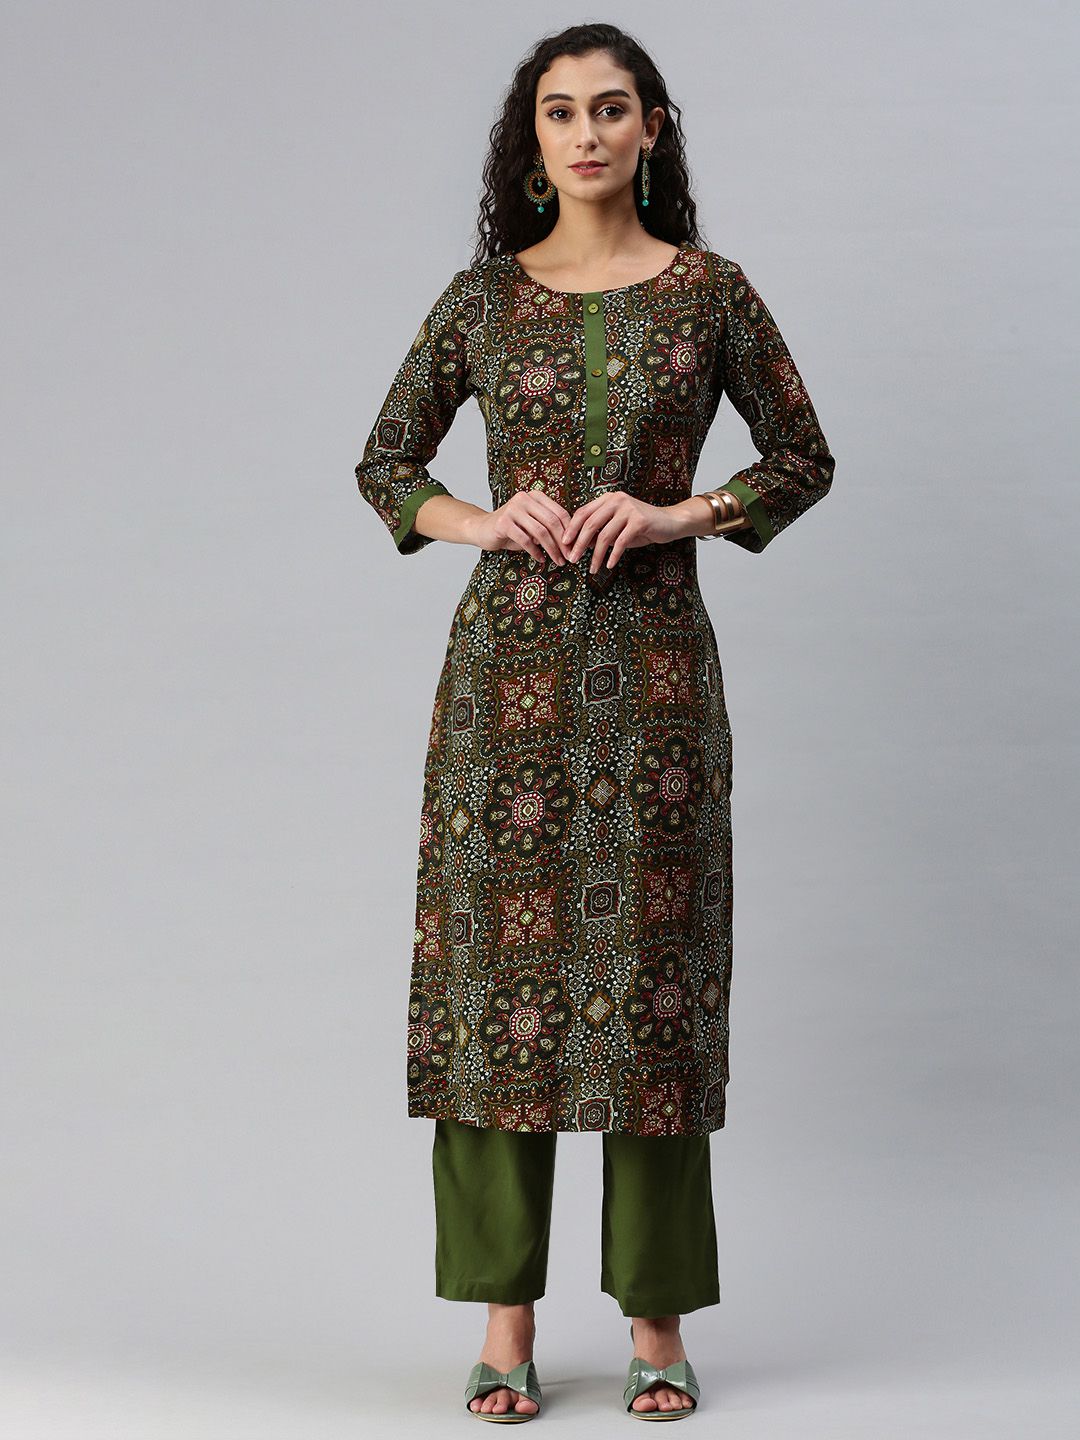     			Aarrah Rayon Printed Kurti With Pants Women's Stitched Salwar Suit - Green ( Pack of 1 )